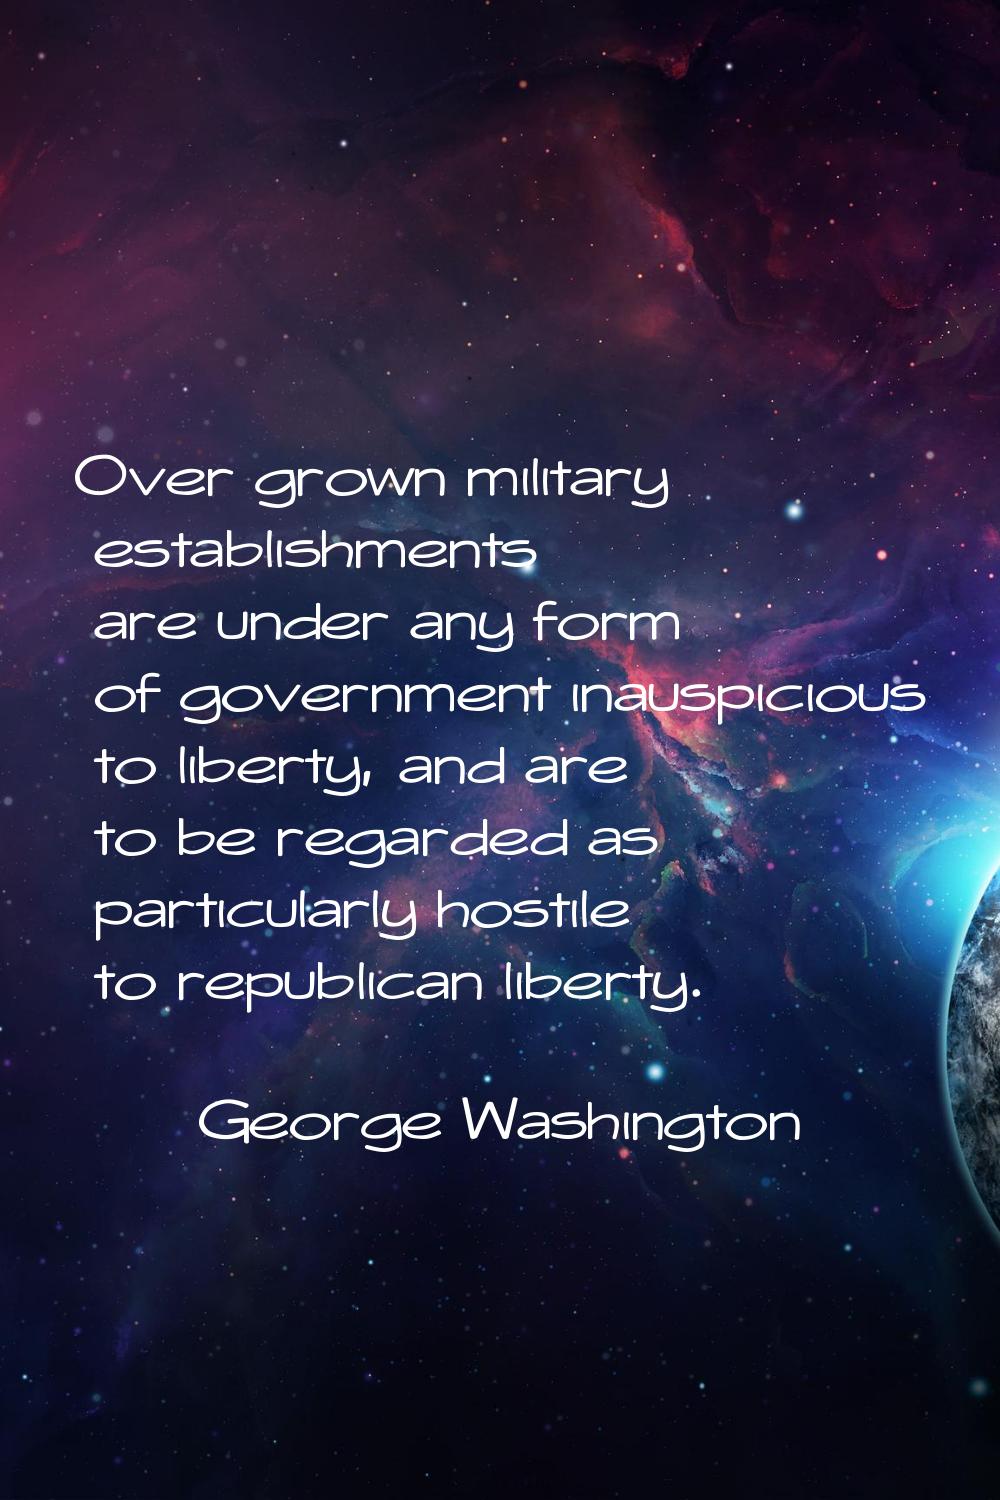 Over grown military establishments are under any form of government inauspicious to liberty, and ar